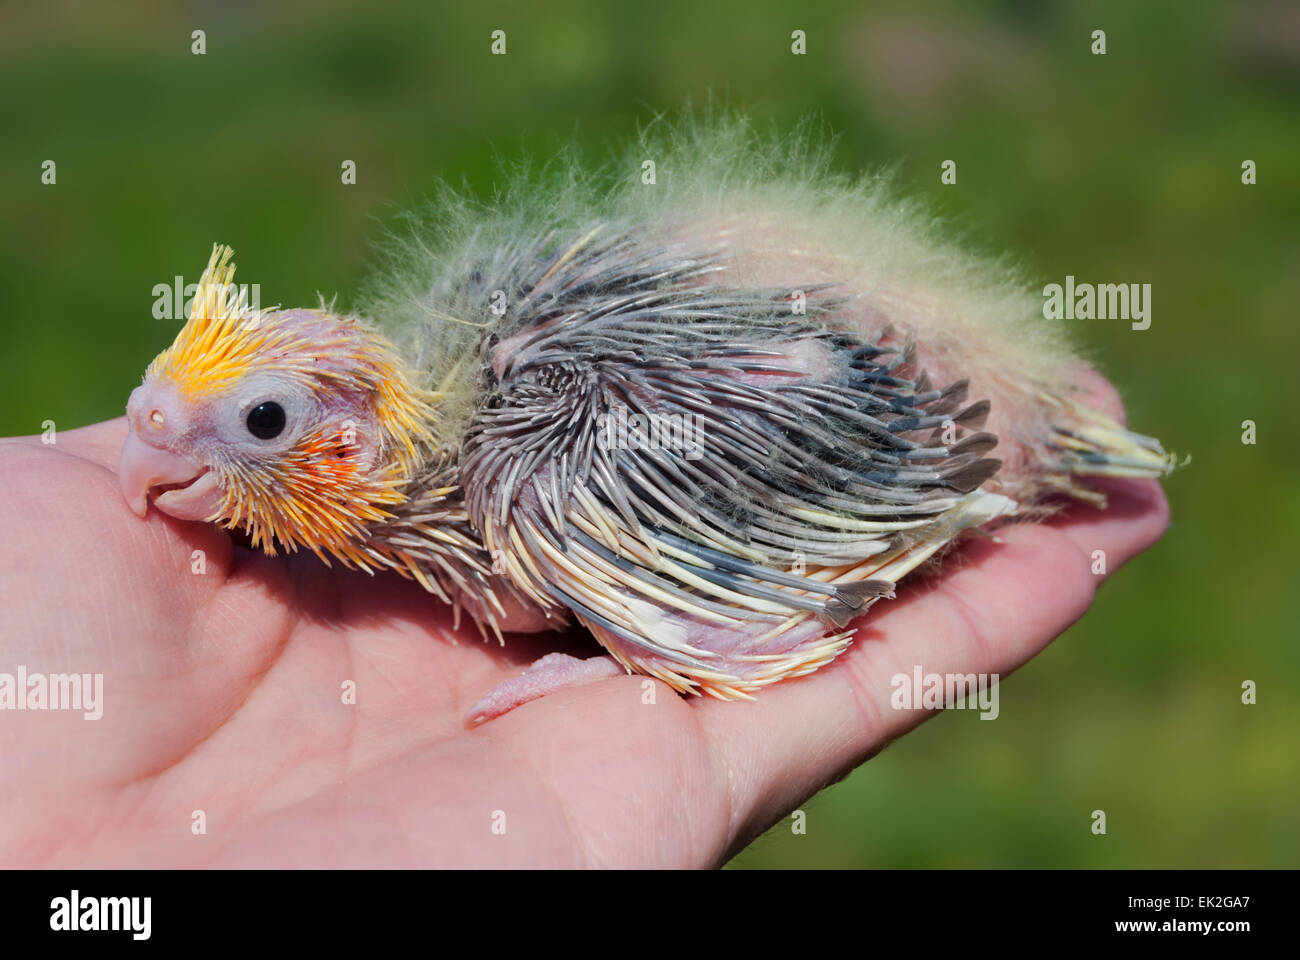 A cockatiel nestling on a human hand Stock Photo